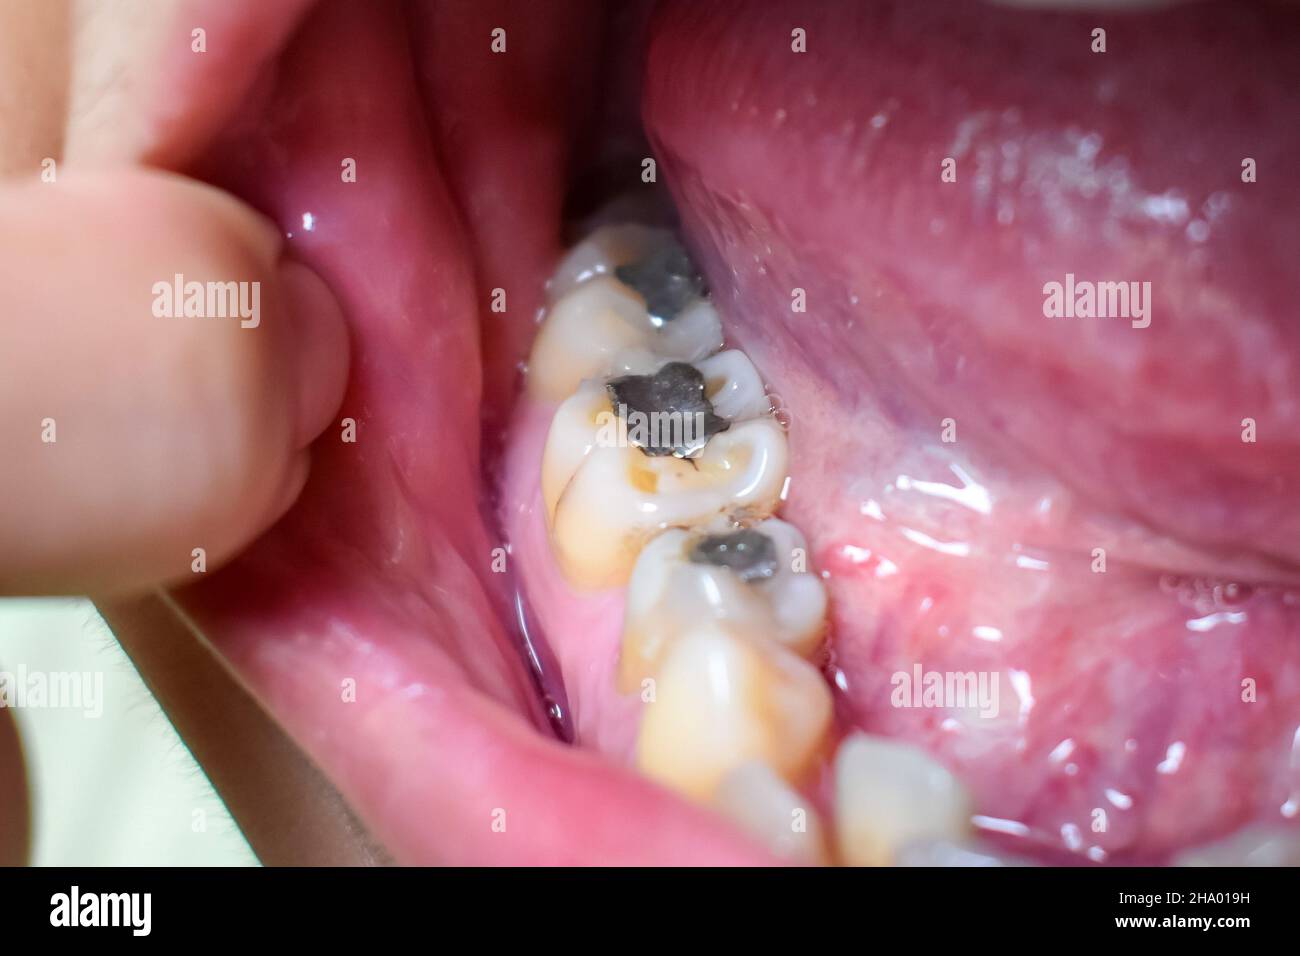 Silver amalgam fillings at right lower first molar and left lower second premolar teeth in Asian, young man. Dental caries are also present showing po Stock Photo